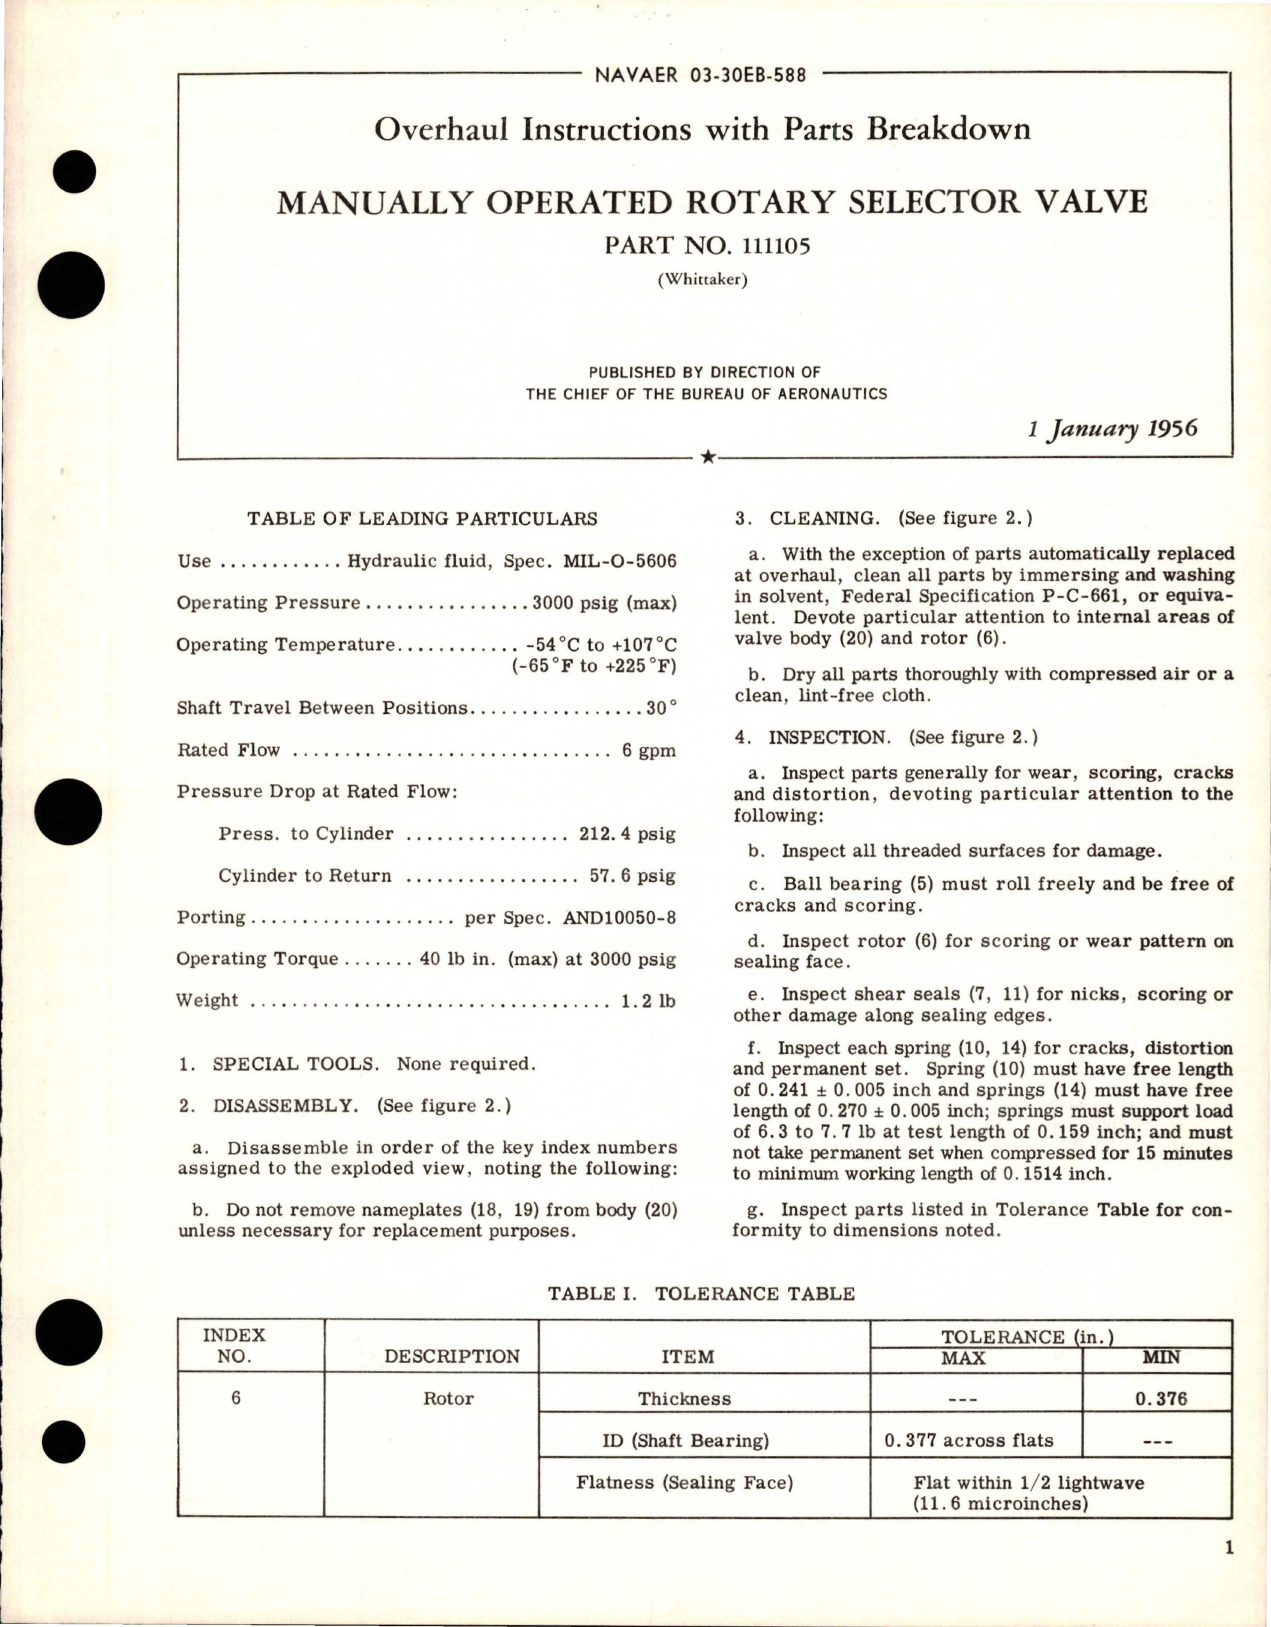 Sample page 1 from AirCorps Library document: Overhaul Instructions with Parts for Manually Operated Rotary Selector Valve - Part 111105